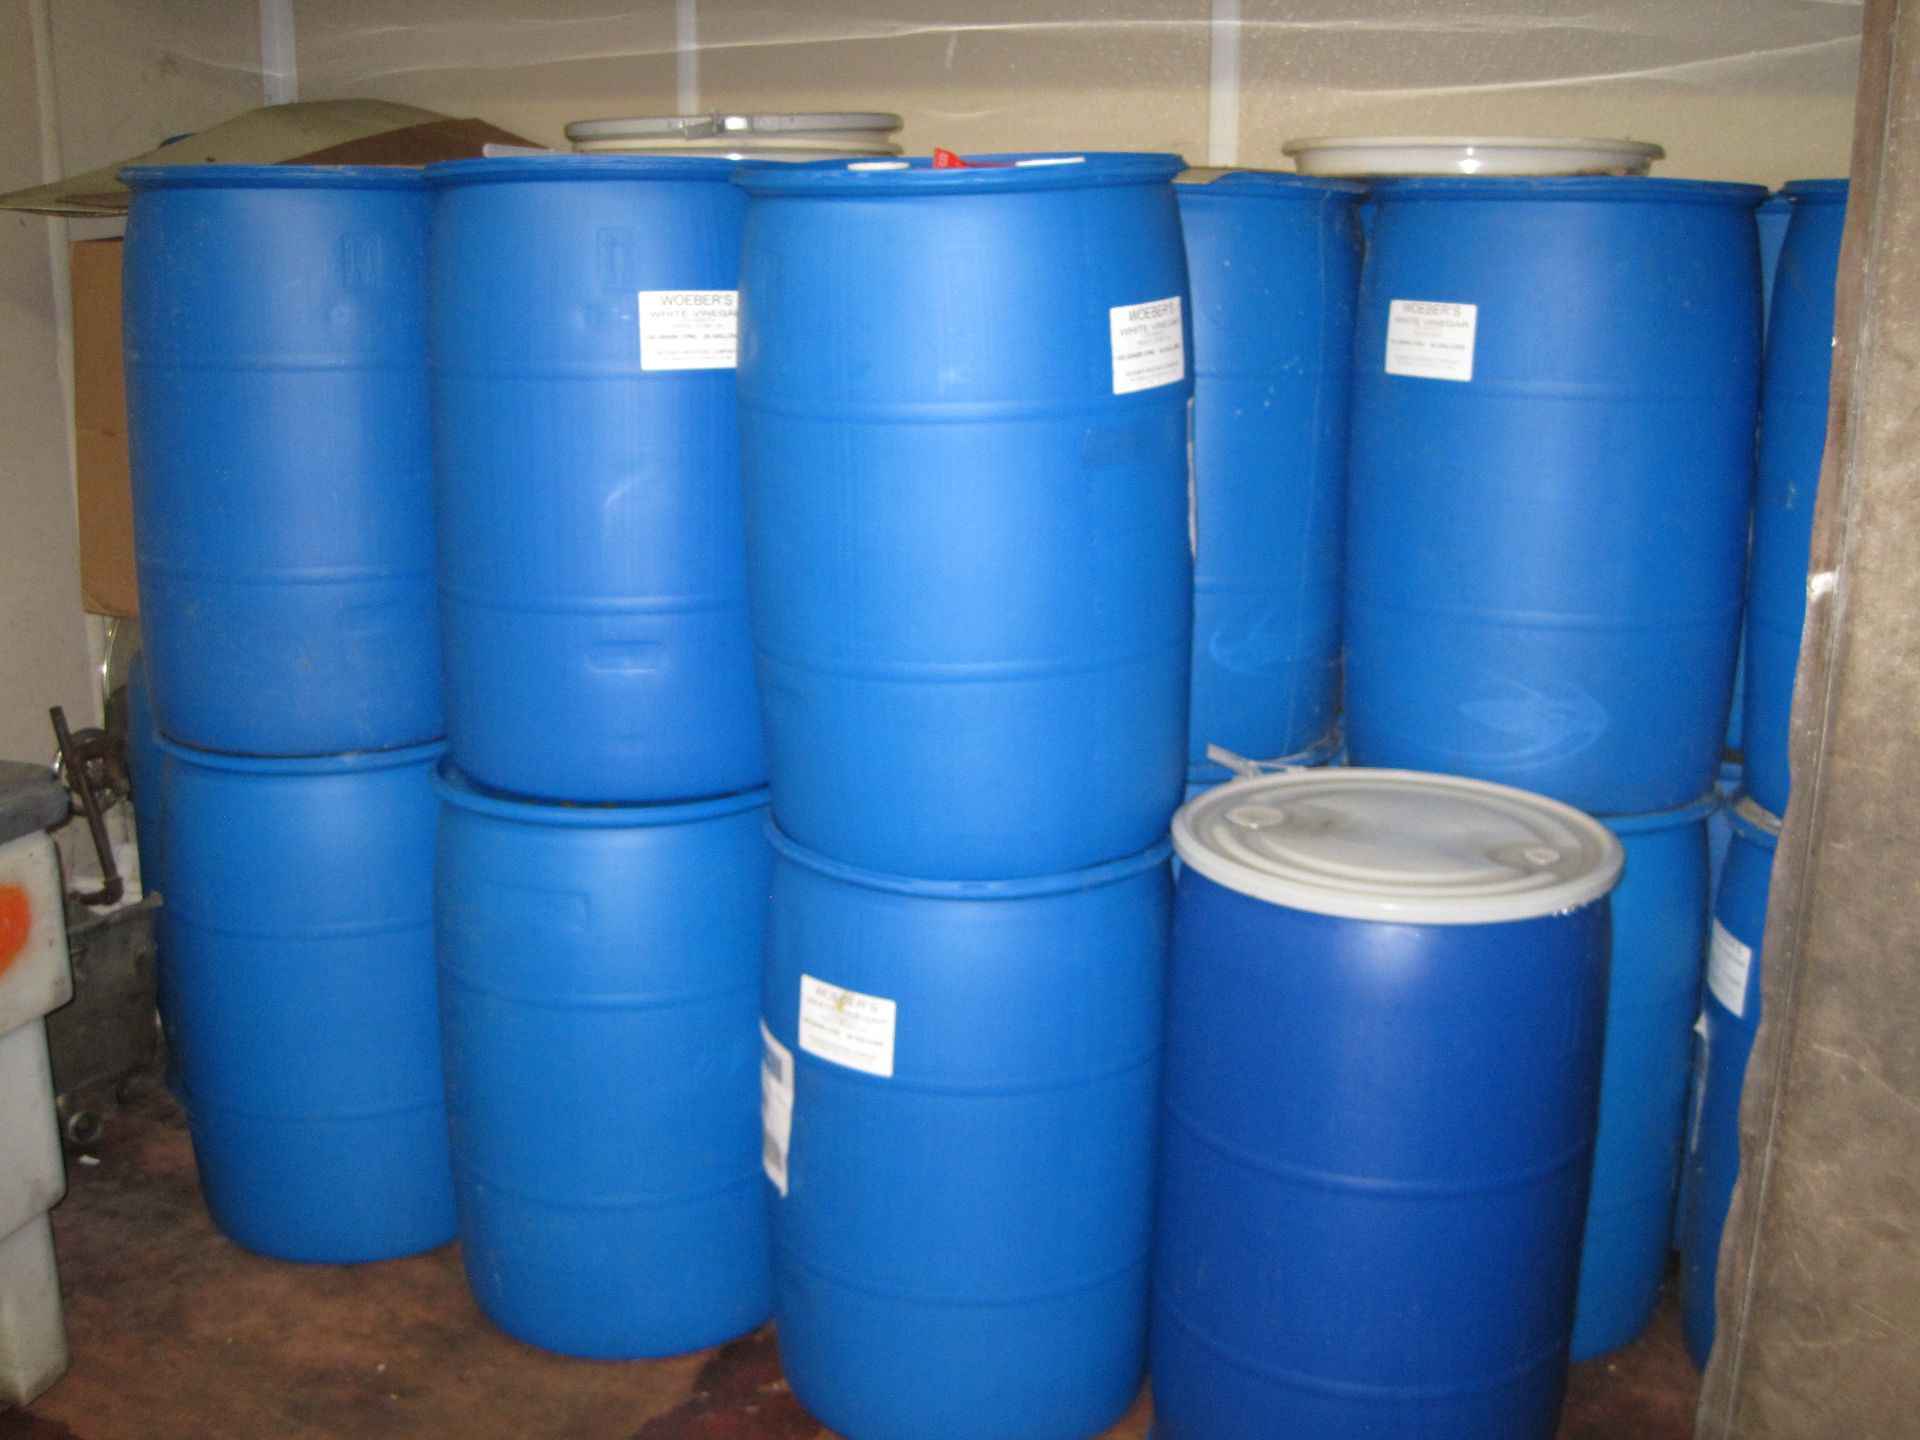 Contents of Room: Approx. (30) Empty 55 Gallon Barrels & Old Kettle